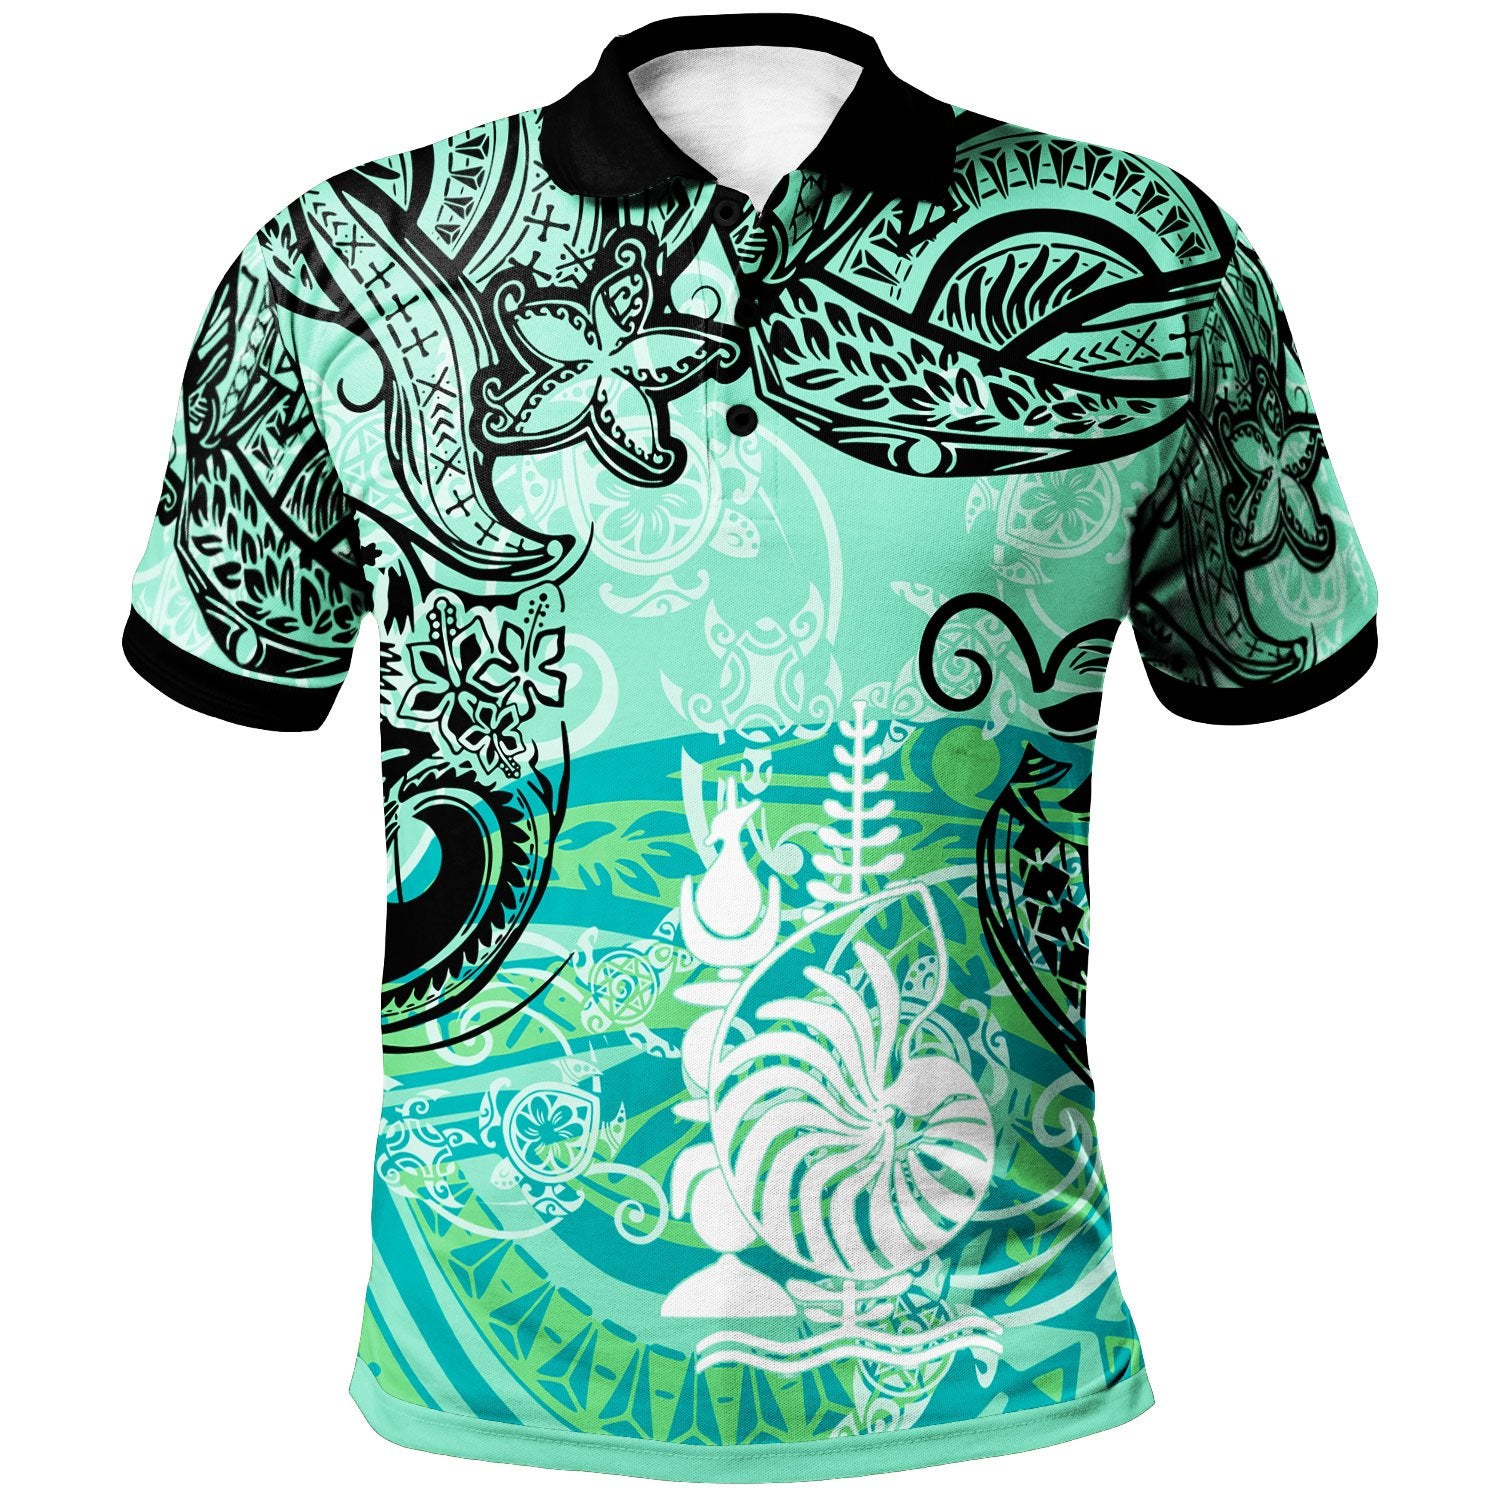 New Caledonia Polo Shirt Vintage Floral Pattern Green Color Unisex Green - Polynesian Pride